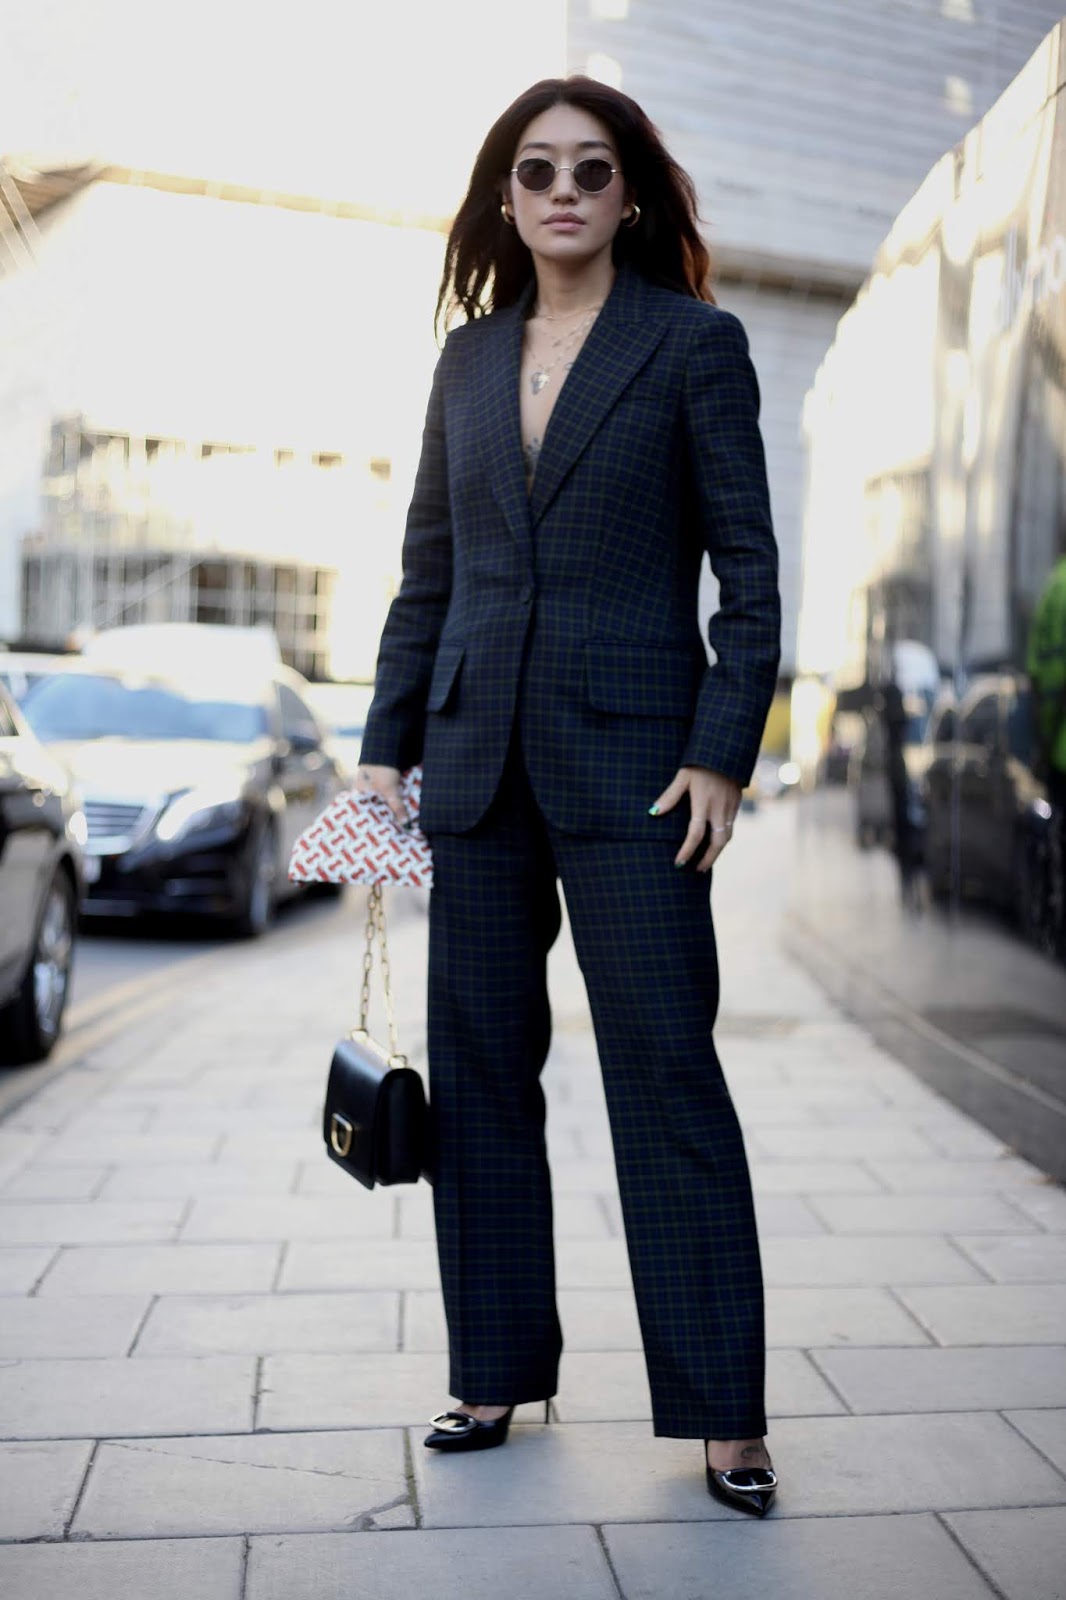 London Fashion by Paul: Street MusesBurberry Spring/Summer 2019Peggy  Gou